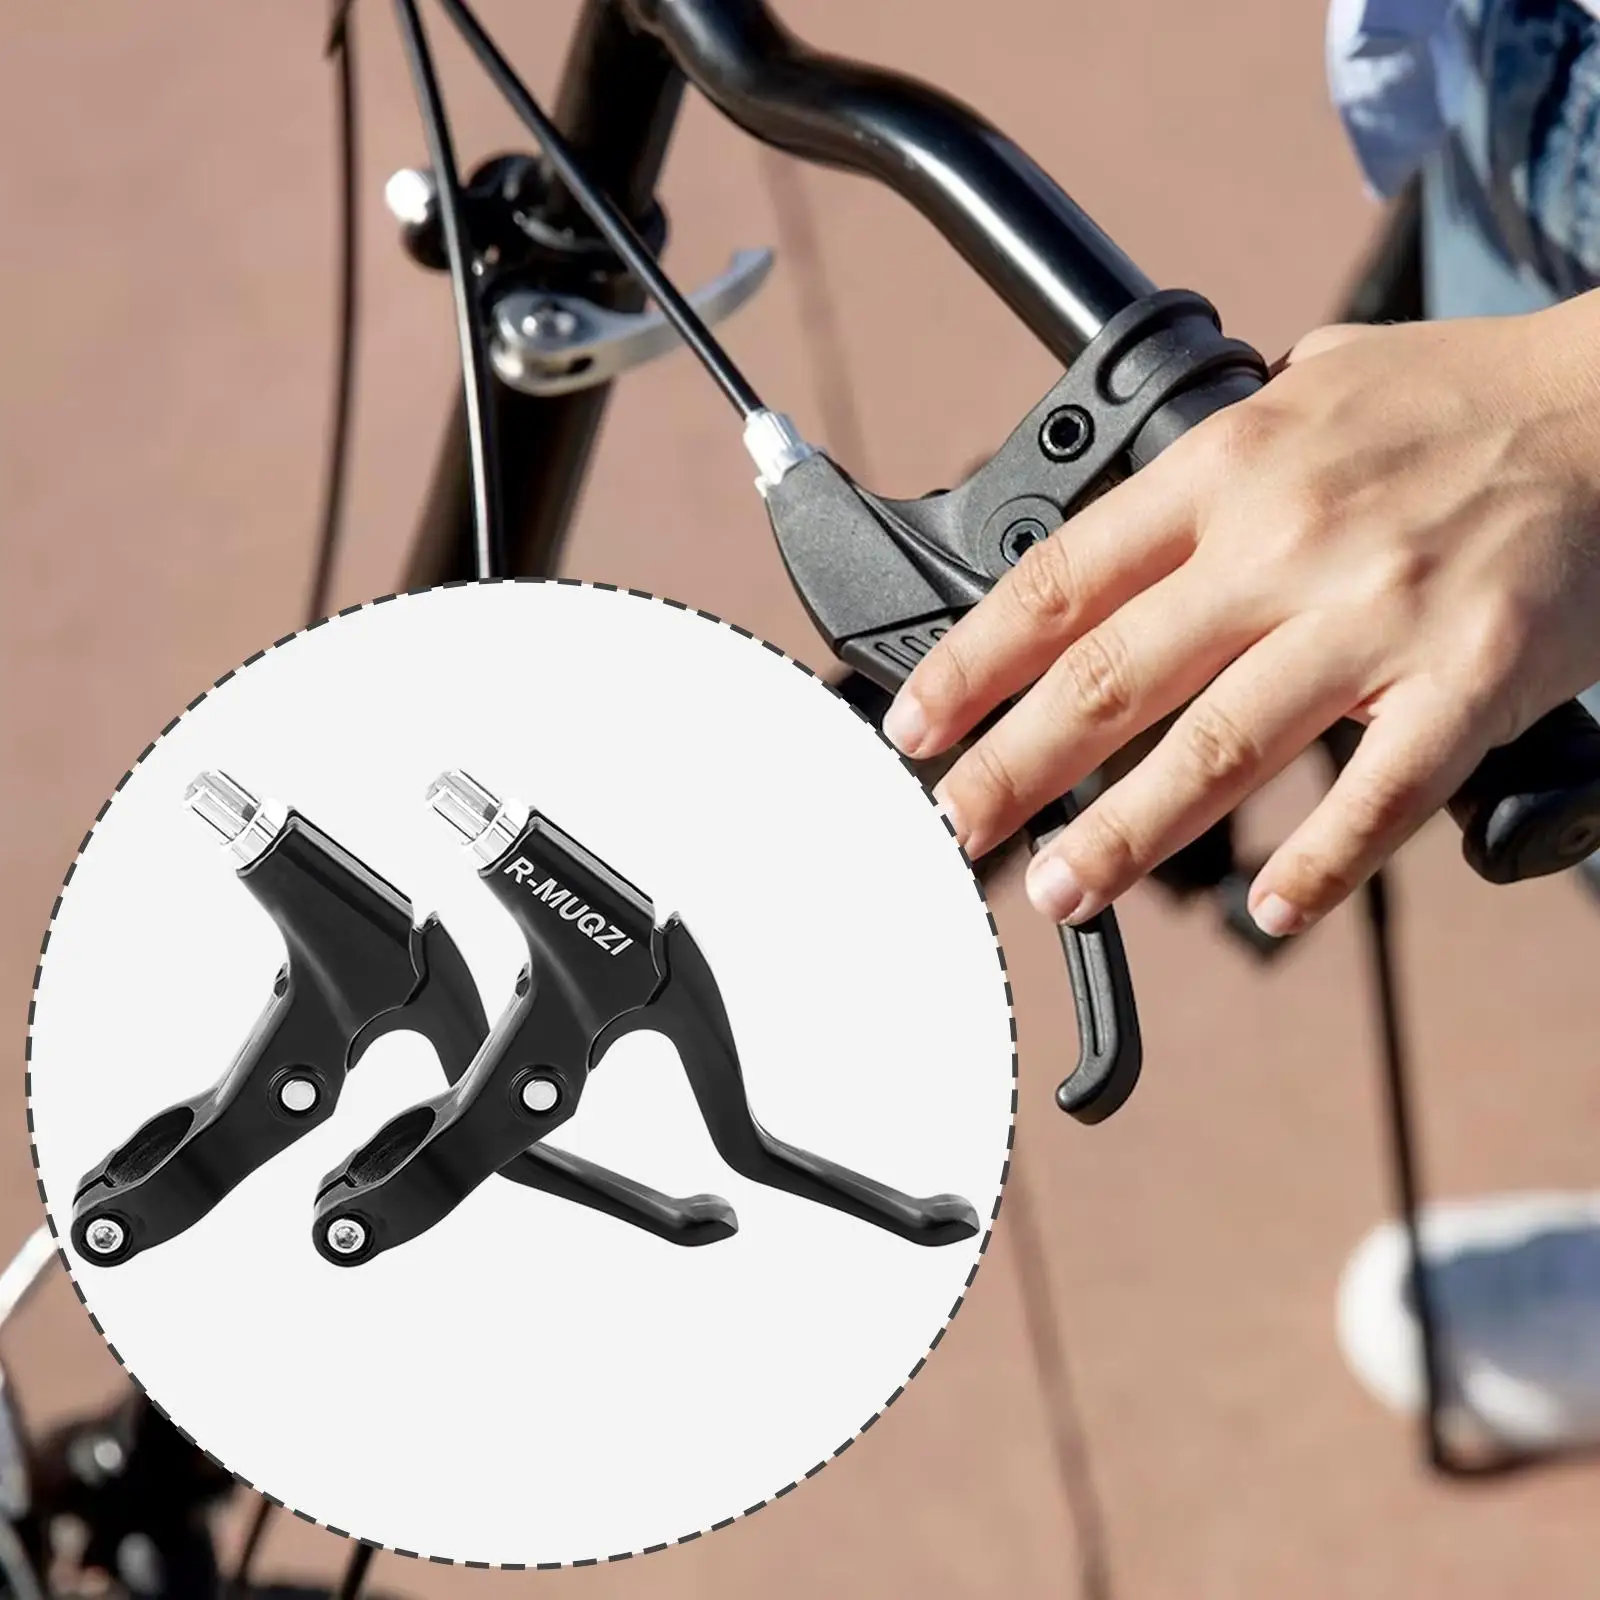 Bicycle Brake Lever Road Bike Brake Levers Bicycle Parts and Accessories